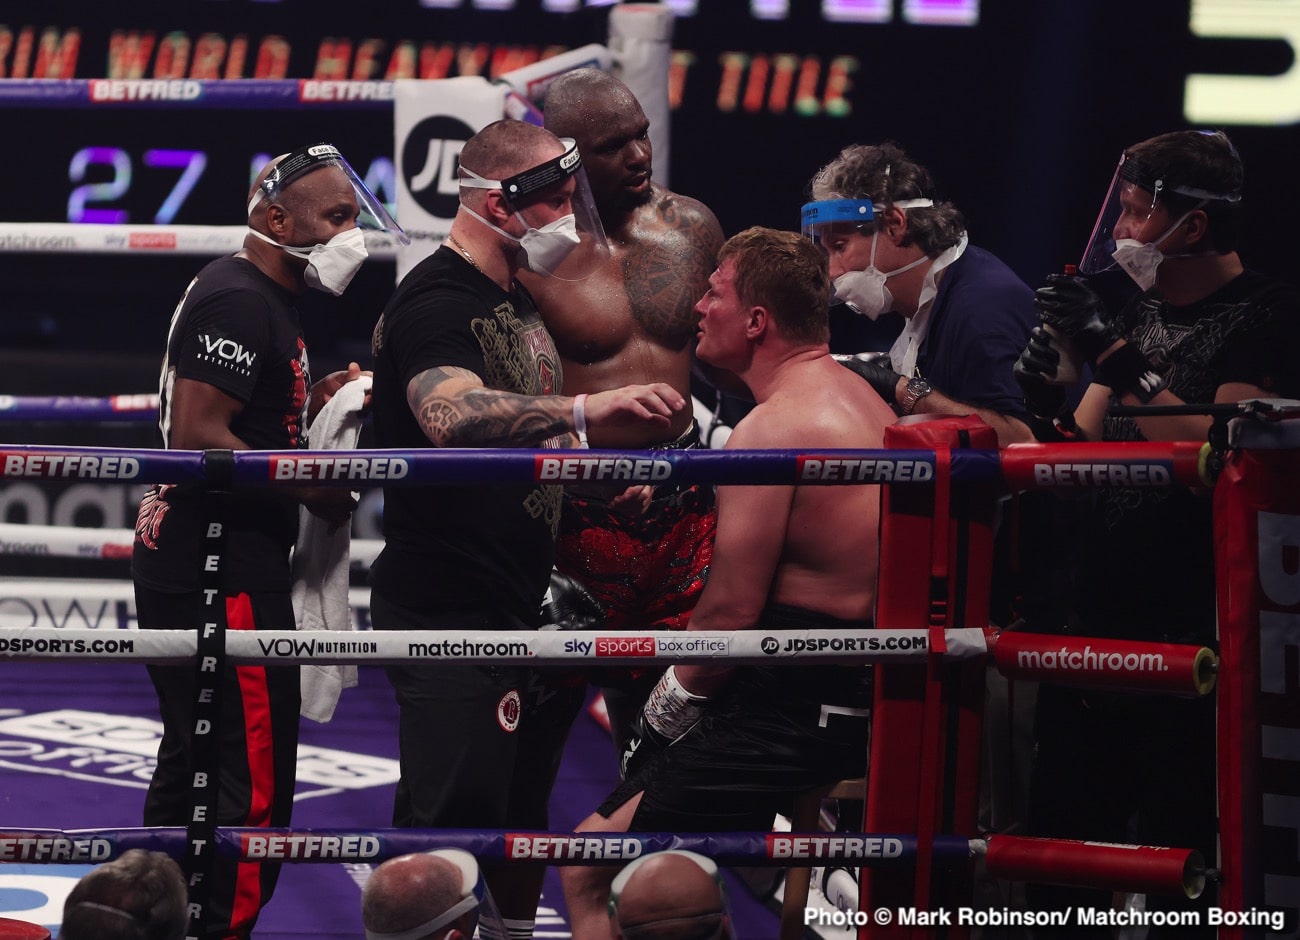 Image: Dillian Whyte shows respect to Alexander Povetkin after his retirement